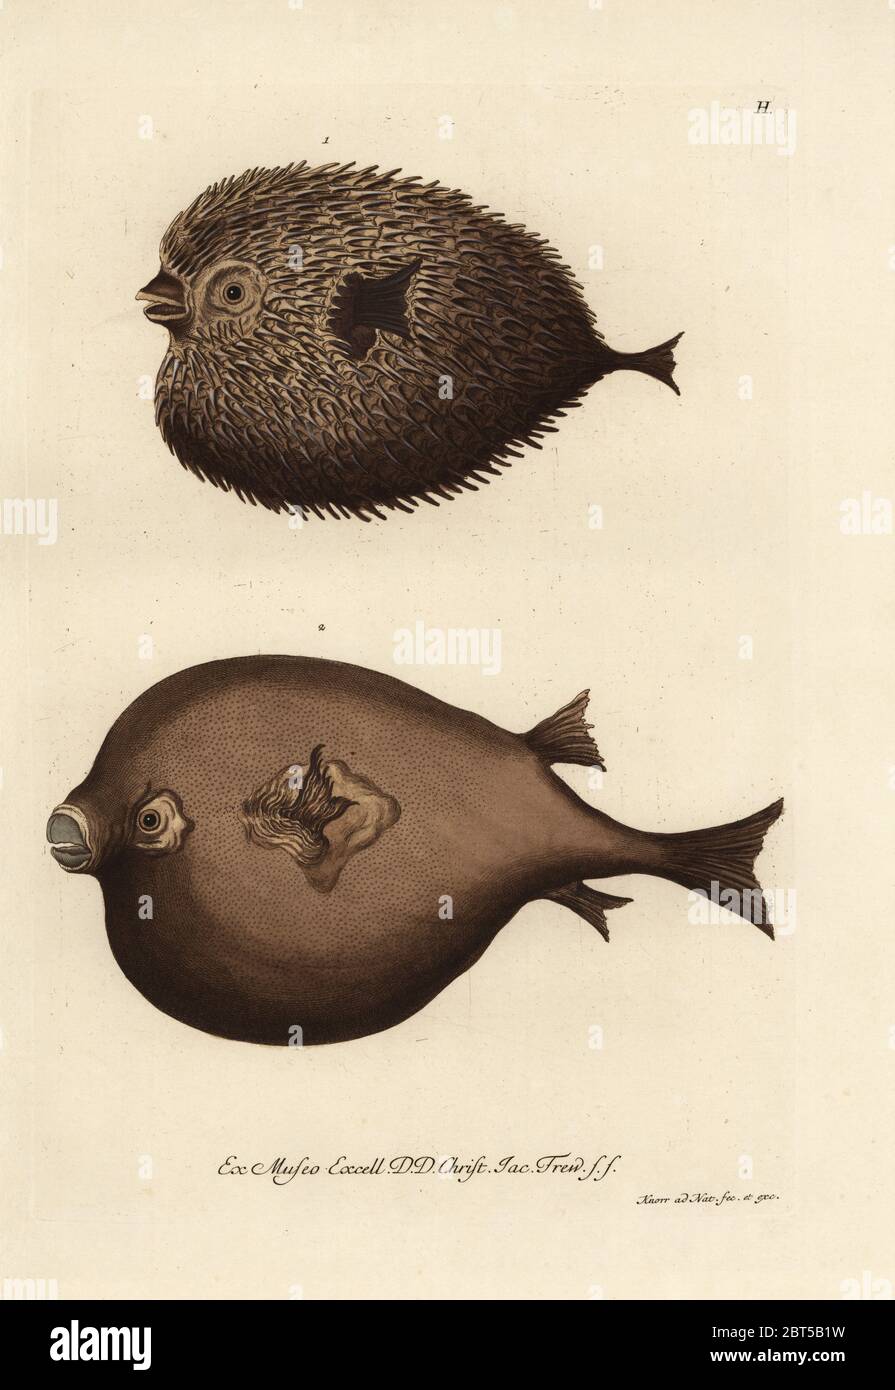 Spot-fin porcupinefish, Diodon hystrix, and pufferfish, Lagocephalus lagocephalus. Un poisson gouetreux a eguillons, Orbis pinnatus, Ostracion, Hystrix, poisson gouetreux uni desarme, Orbis inermis, Orbis mammillaris. Handcoloured copperplate drawn and engraved by Georg Wolfgang Knorr from his Deliciae Naturae Selectae of Kabinet van Zeldzaamheden der Natuur, Blusse and Son, Nuremberg, 1771. Specimens from a Wunderkammer or Cabinet of Curiosities owned by Dr. Christoph Jacob Trew in Nuremberg. Stock Photo